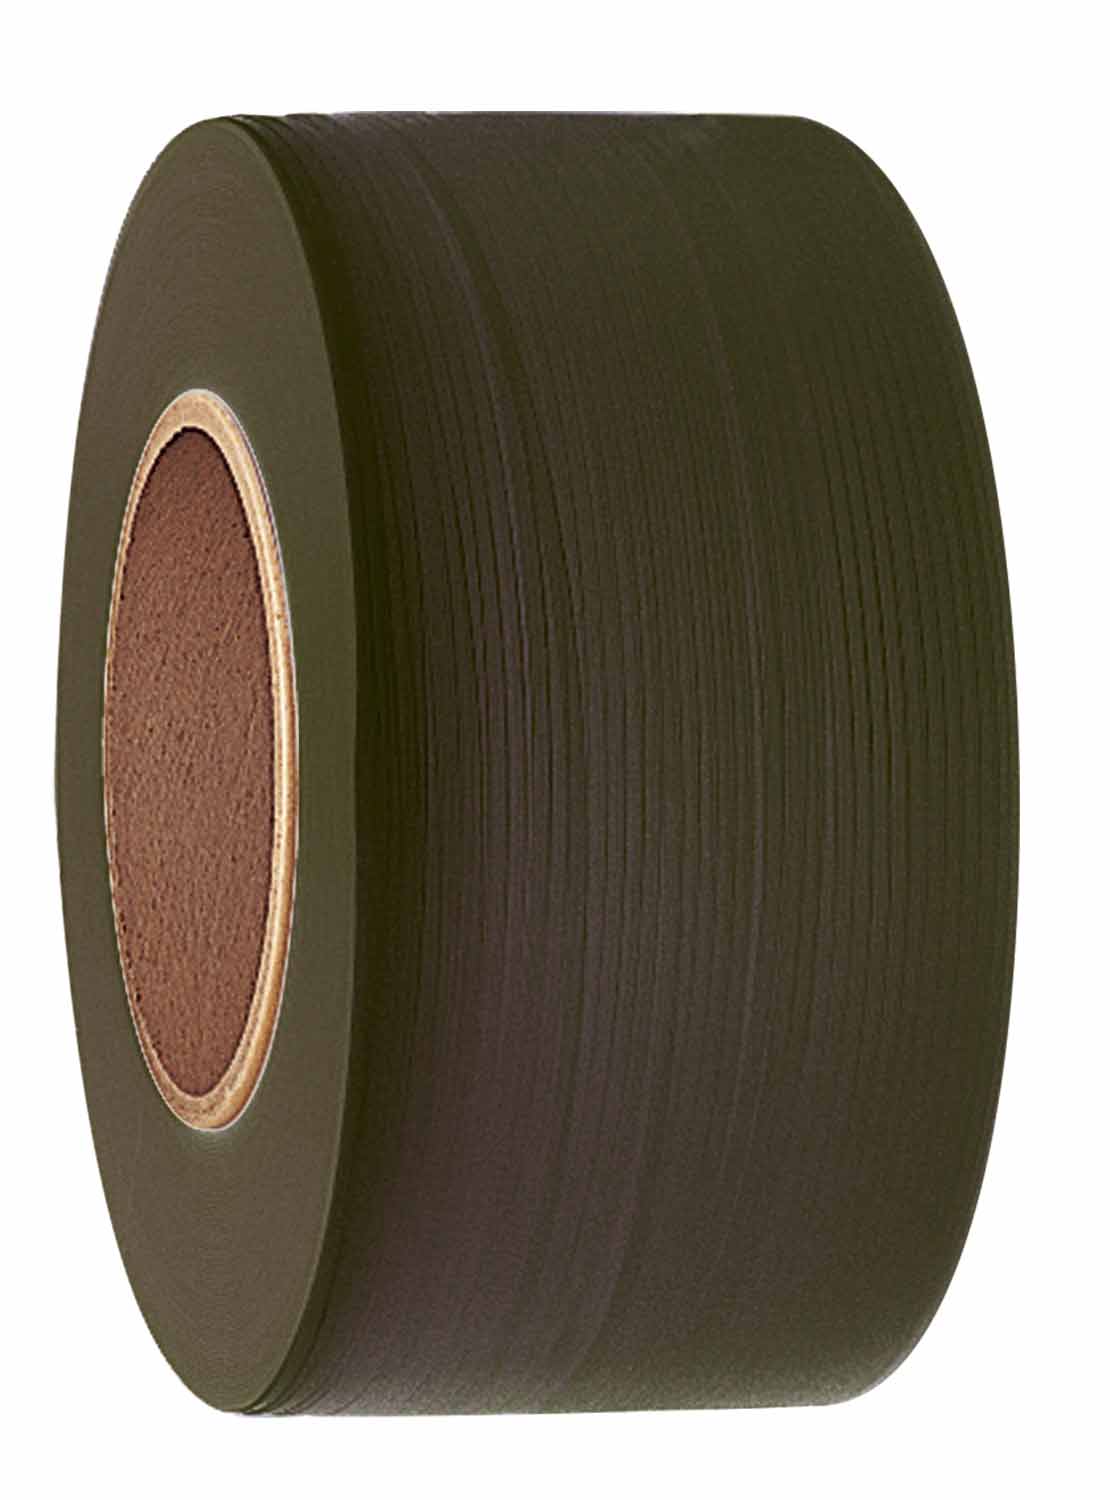 PLASTIC STRAPPING BLACK 1/2&quot;
300 LB. 8X8 POLYPROPYLENE
SIGNODE CONTRAX